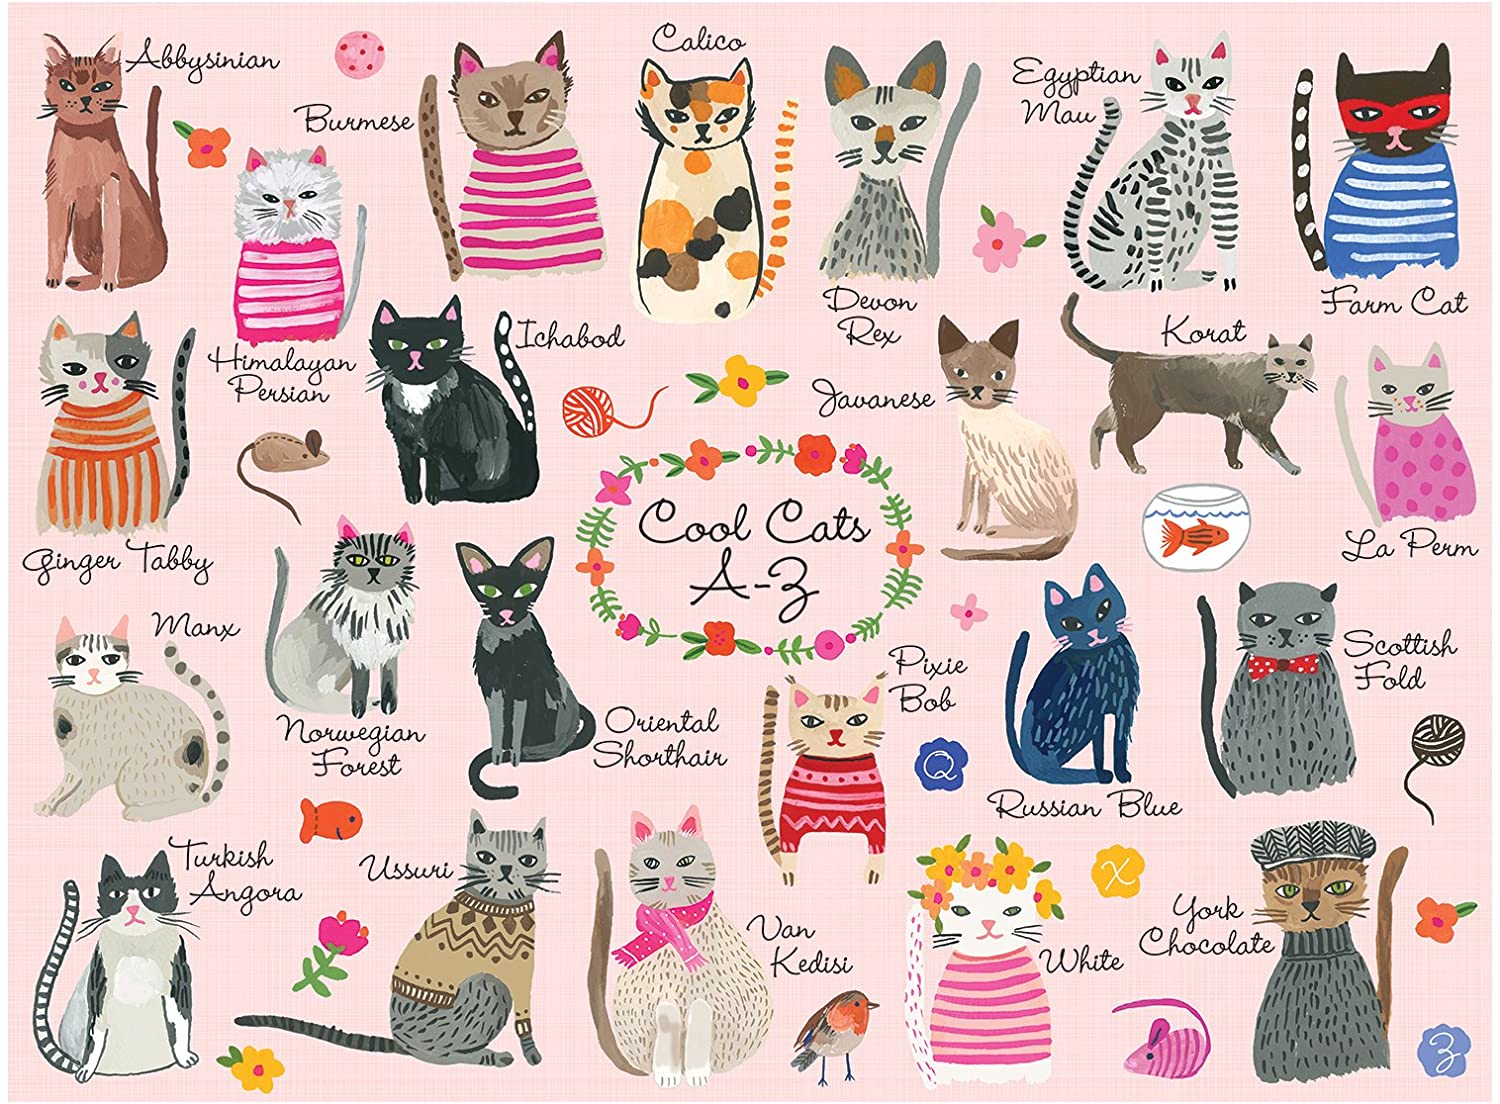 Cool Cats A-Z